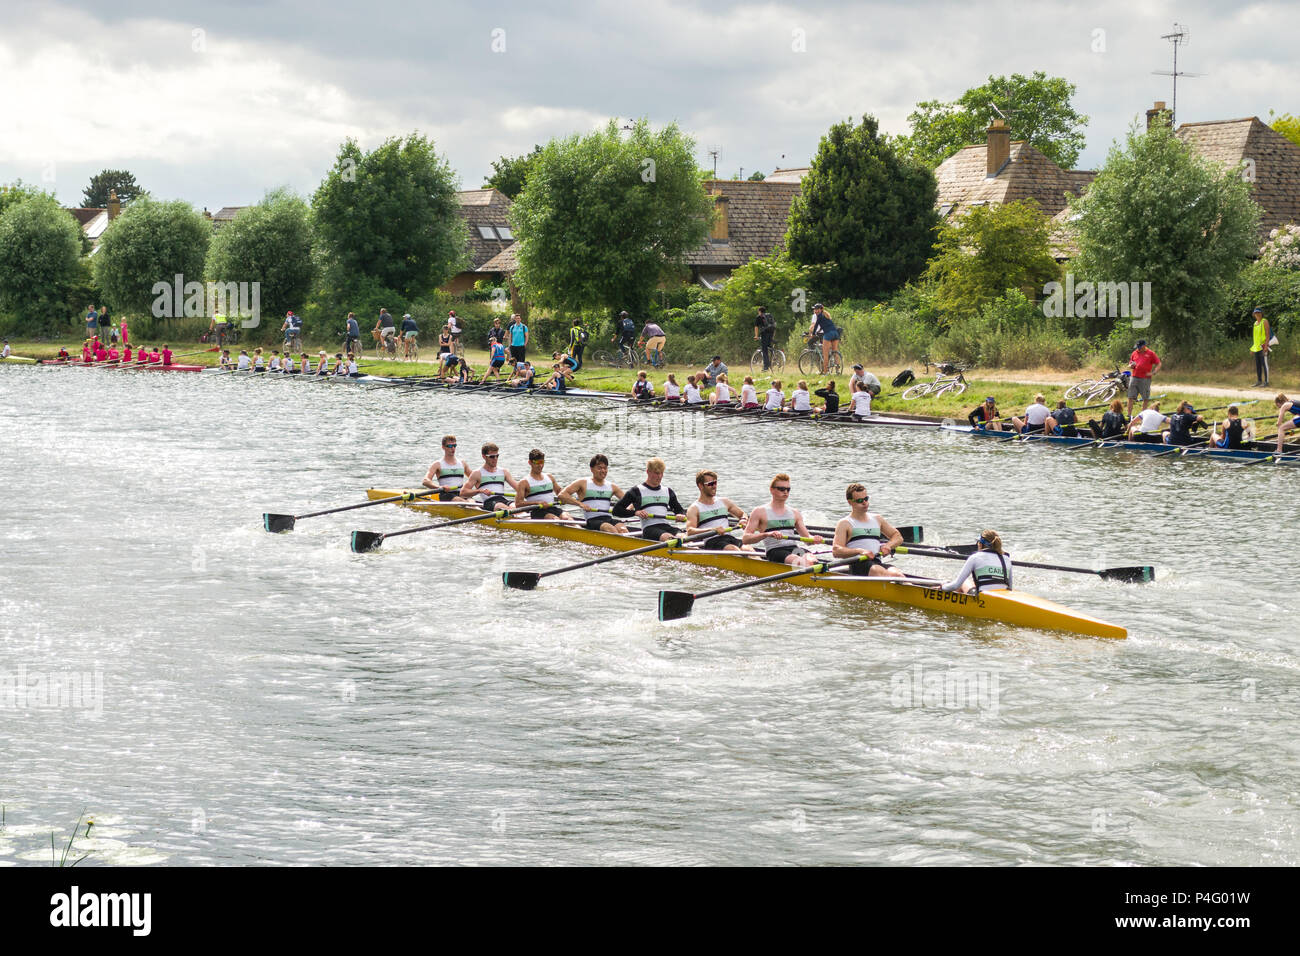 Mens boat crew on the river Cam taking part in The Bumps row boat regatta in Summer, Cambridge, UK Stock Photo